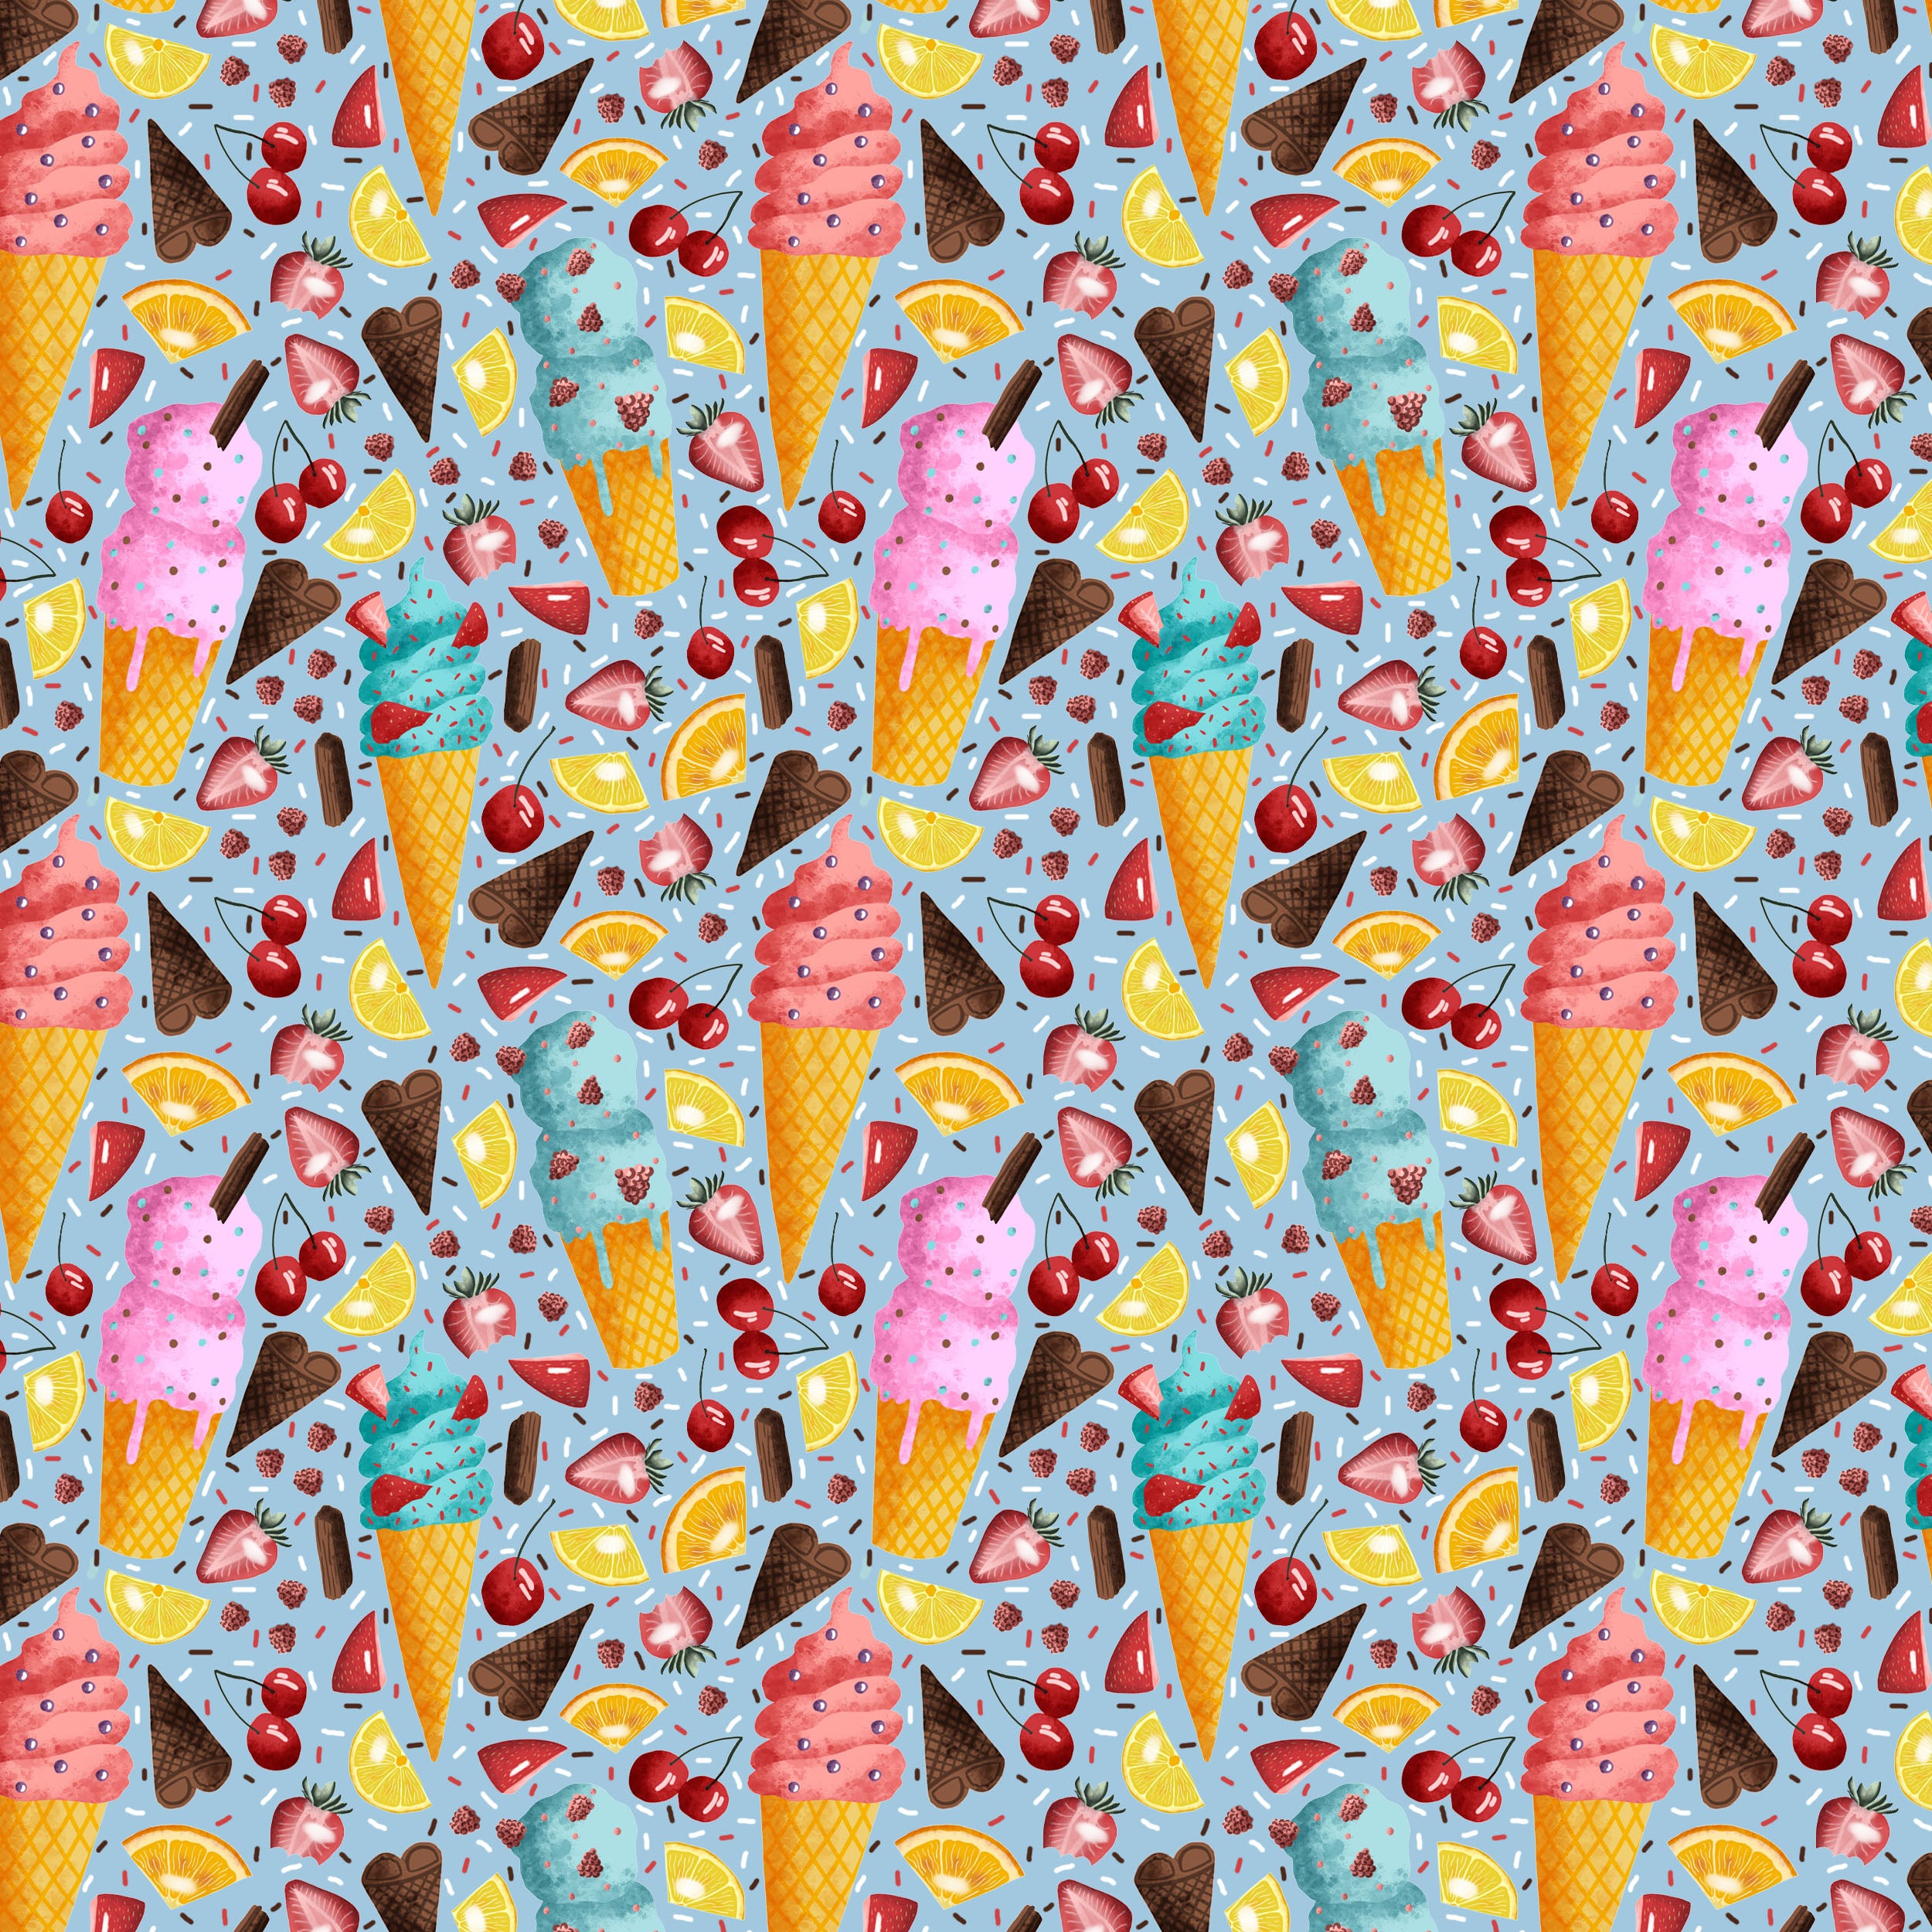 busy surface pattern design of ice creams and fruits